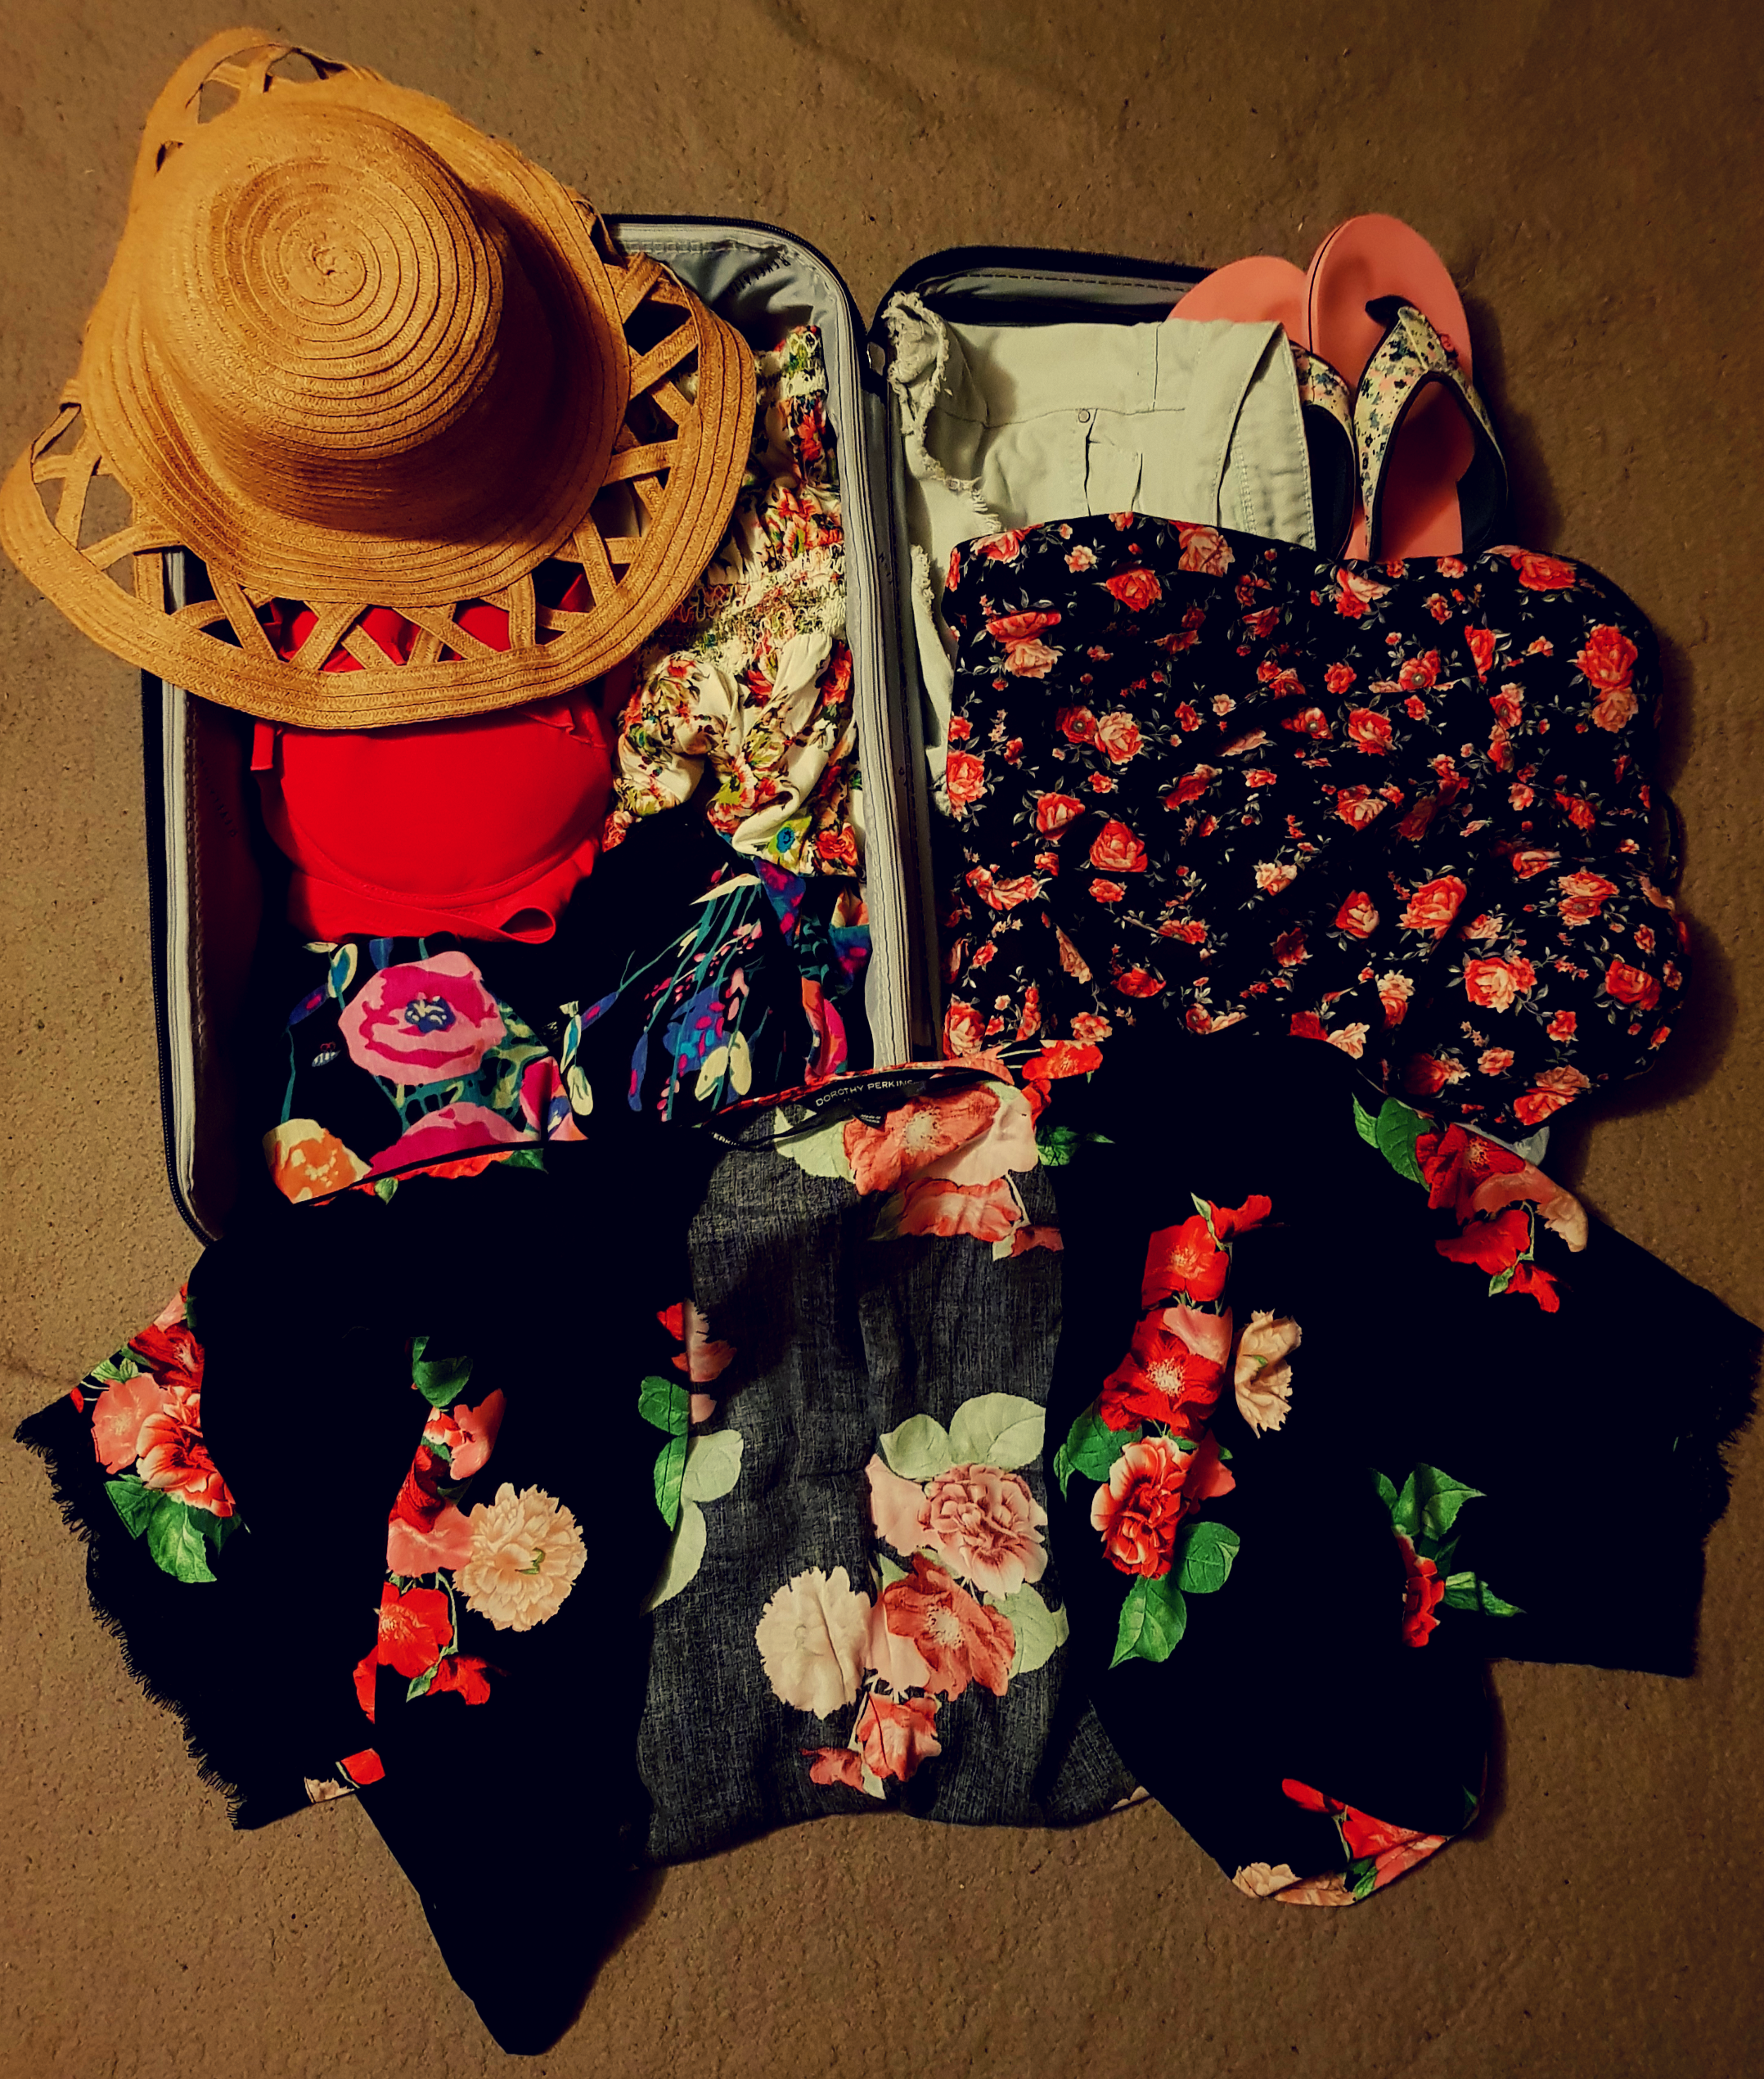 A purple suitcase with carry-on packing for Cyprus. A brown sunhat, red bikini, black and red dress, black and red kimono, white flowery dress, pink flip-flops and blue shorts.